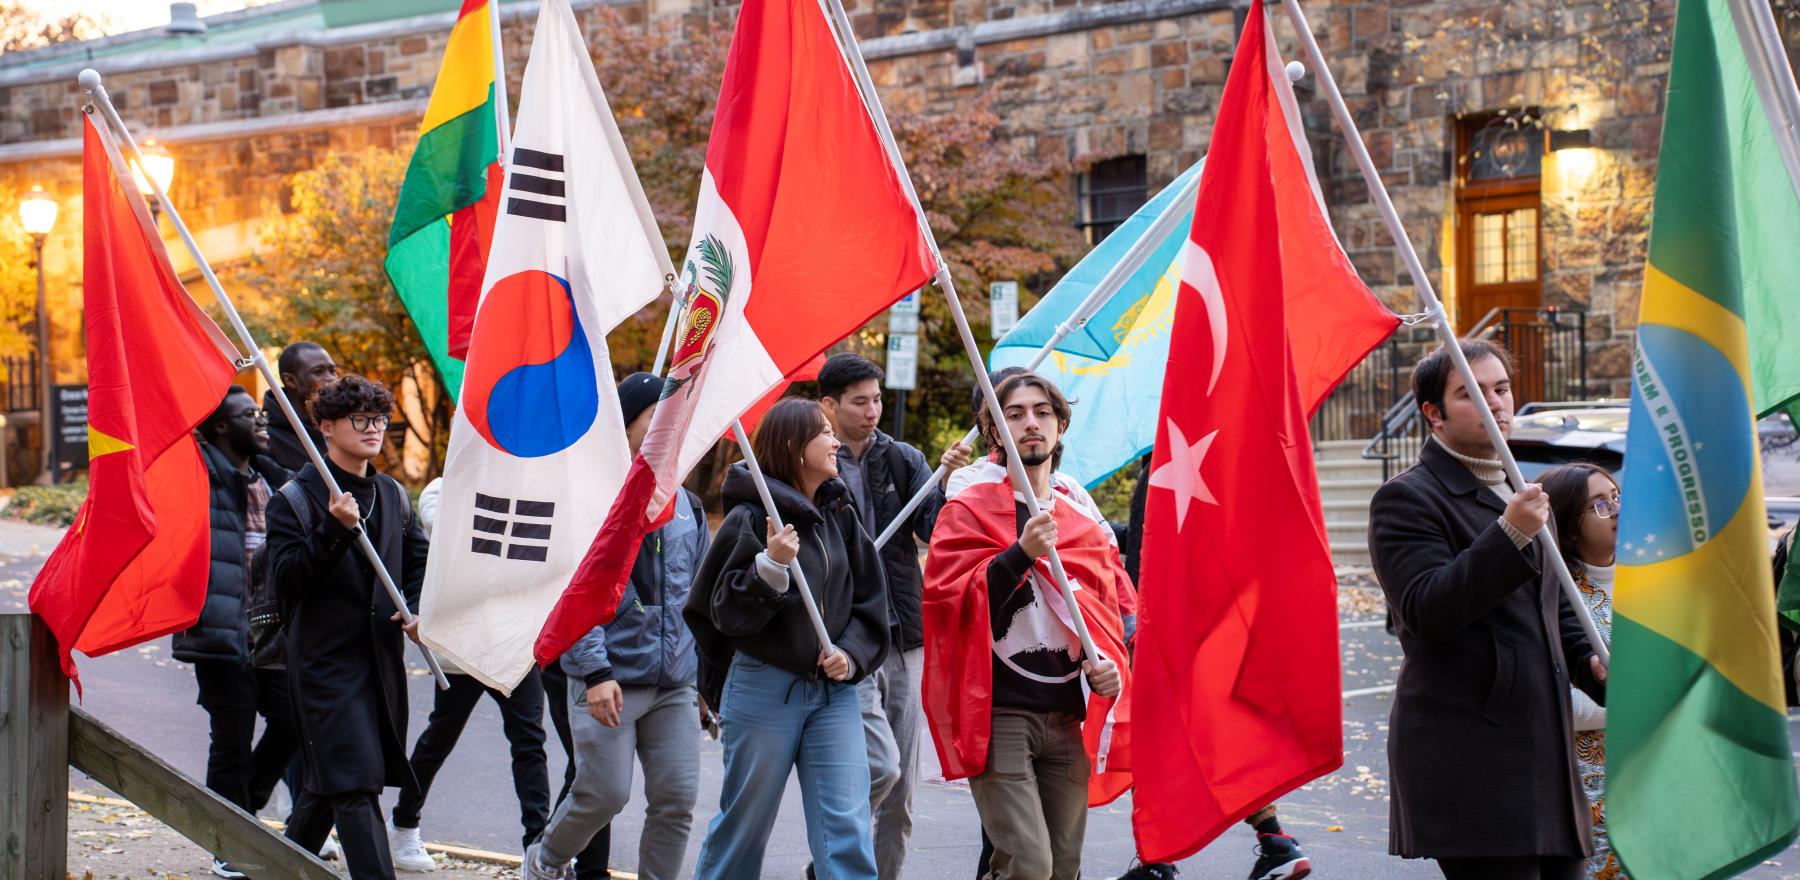 Students carrying various flags while walking in a parade on the campus of Lehigh University